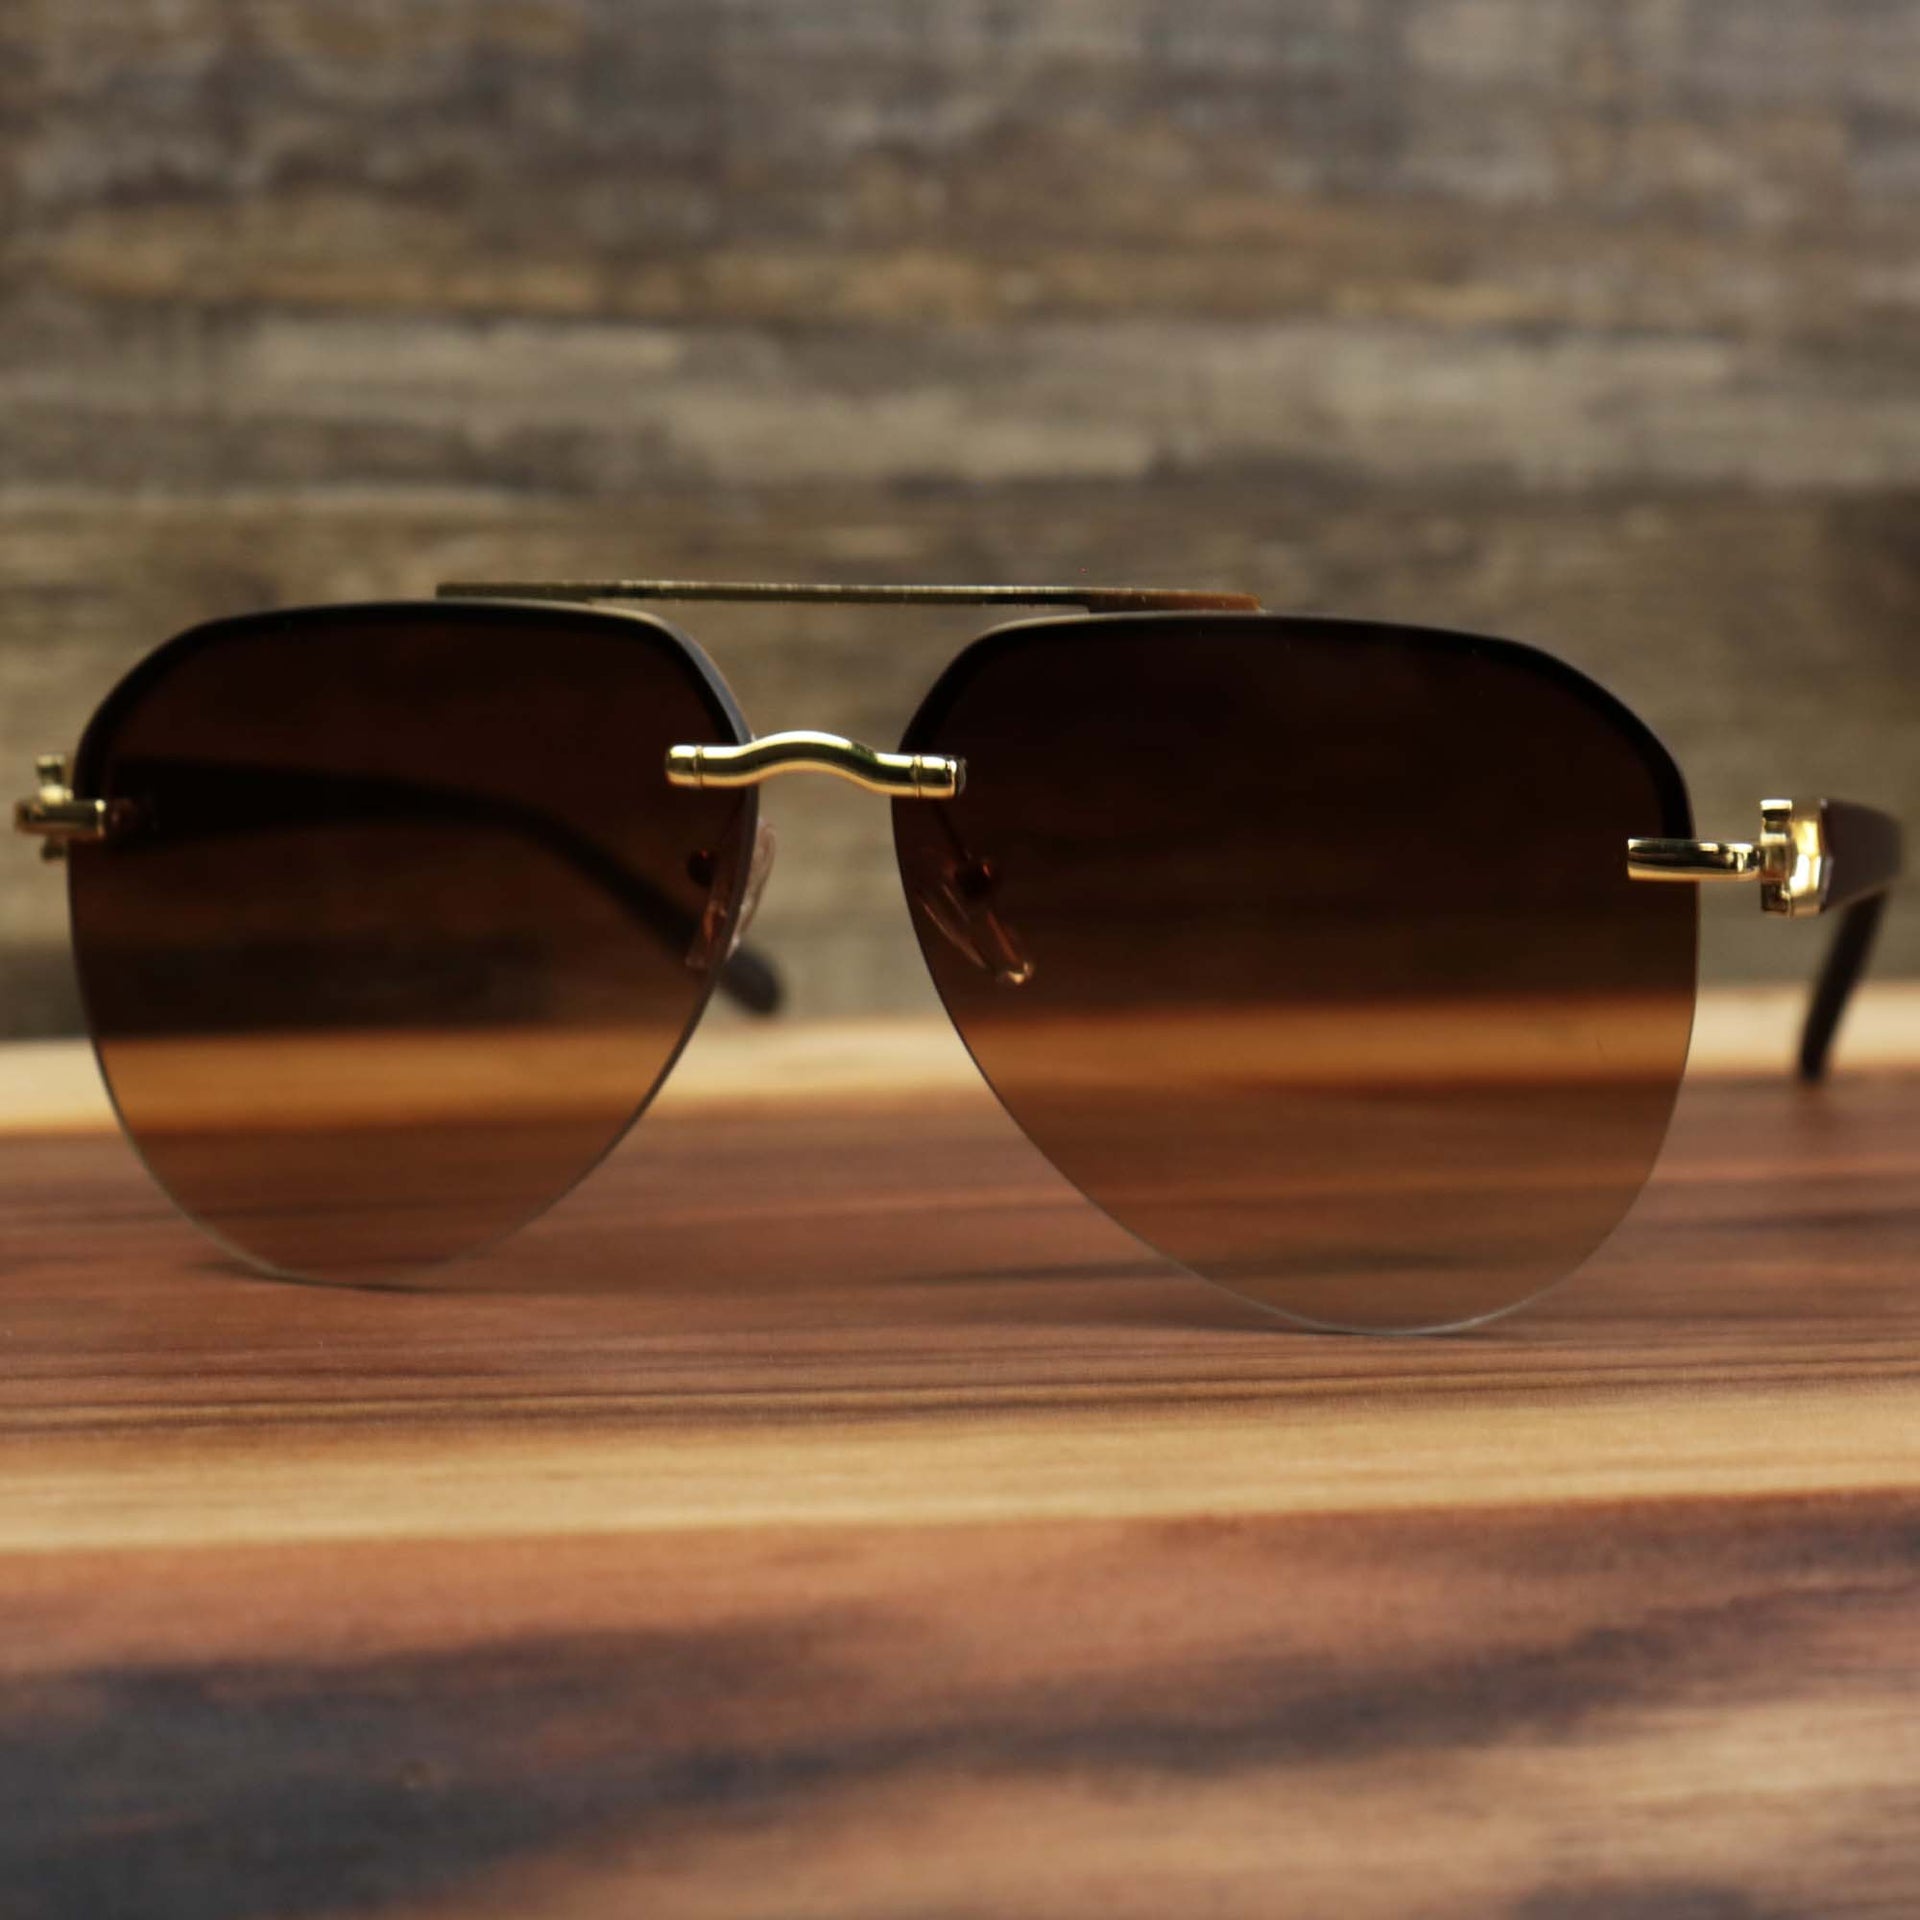 The Round Aviator Frames Brown Gradient Lens Sunglasses with Gold Frame